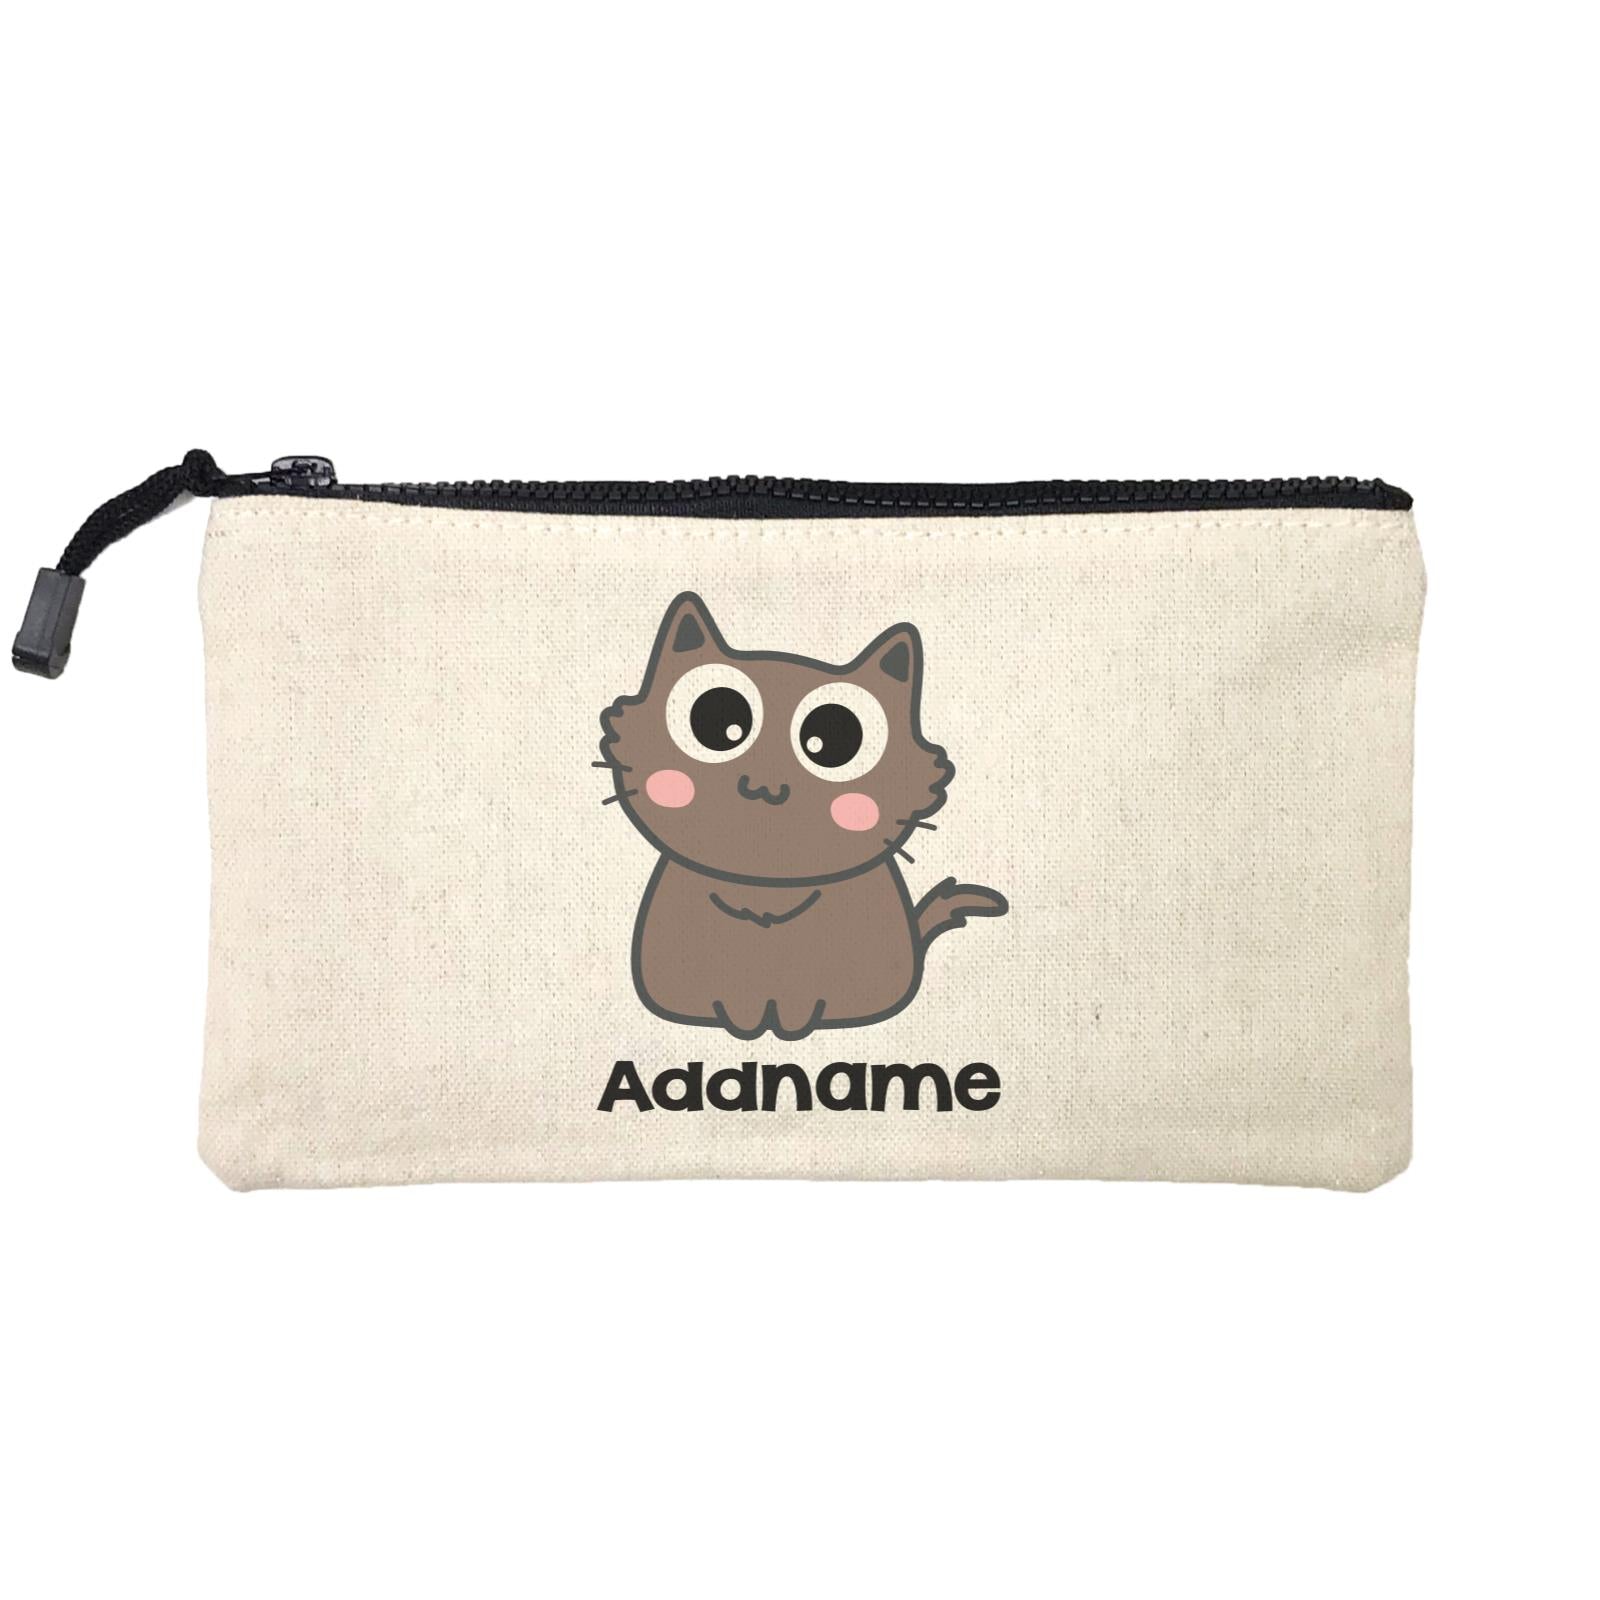 Drawn Adorable Cats Chocolate Addname Mini Accessories Stationery Pouch